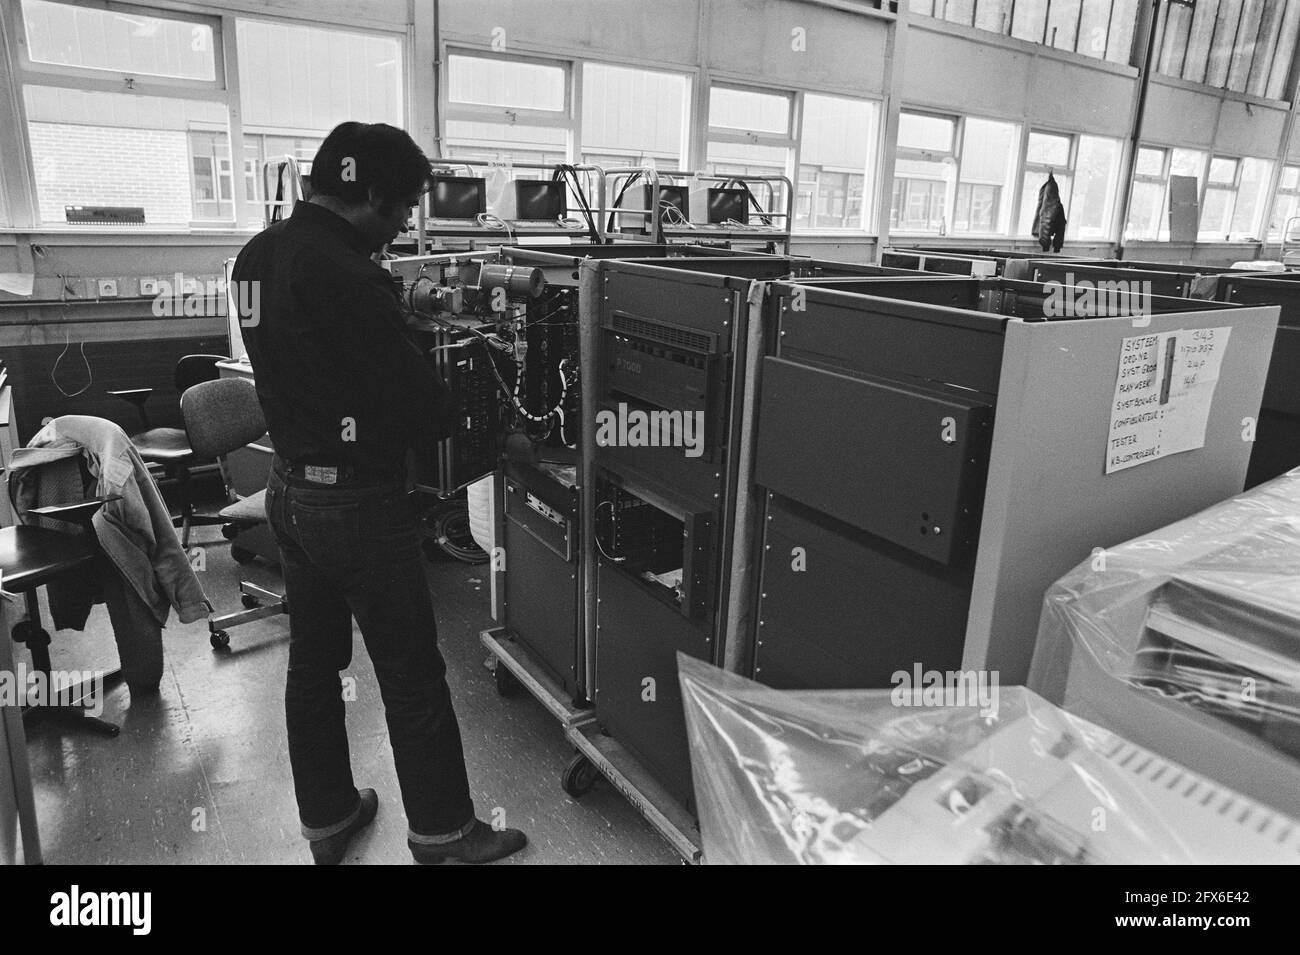 The staff of the company that manufactures computer equipment works as usual, October 27, 1981, companies, computers, employees, The Netherlands, 20th century press agency photo, news to remember, documentary, historic photography 1945-1990, visual stories, human history of the Twentieth Century, capturing moments in time Stock Photo